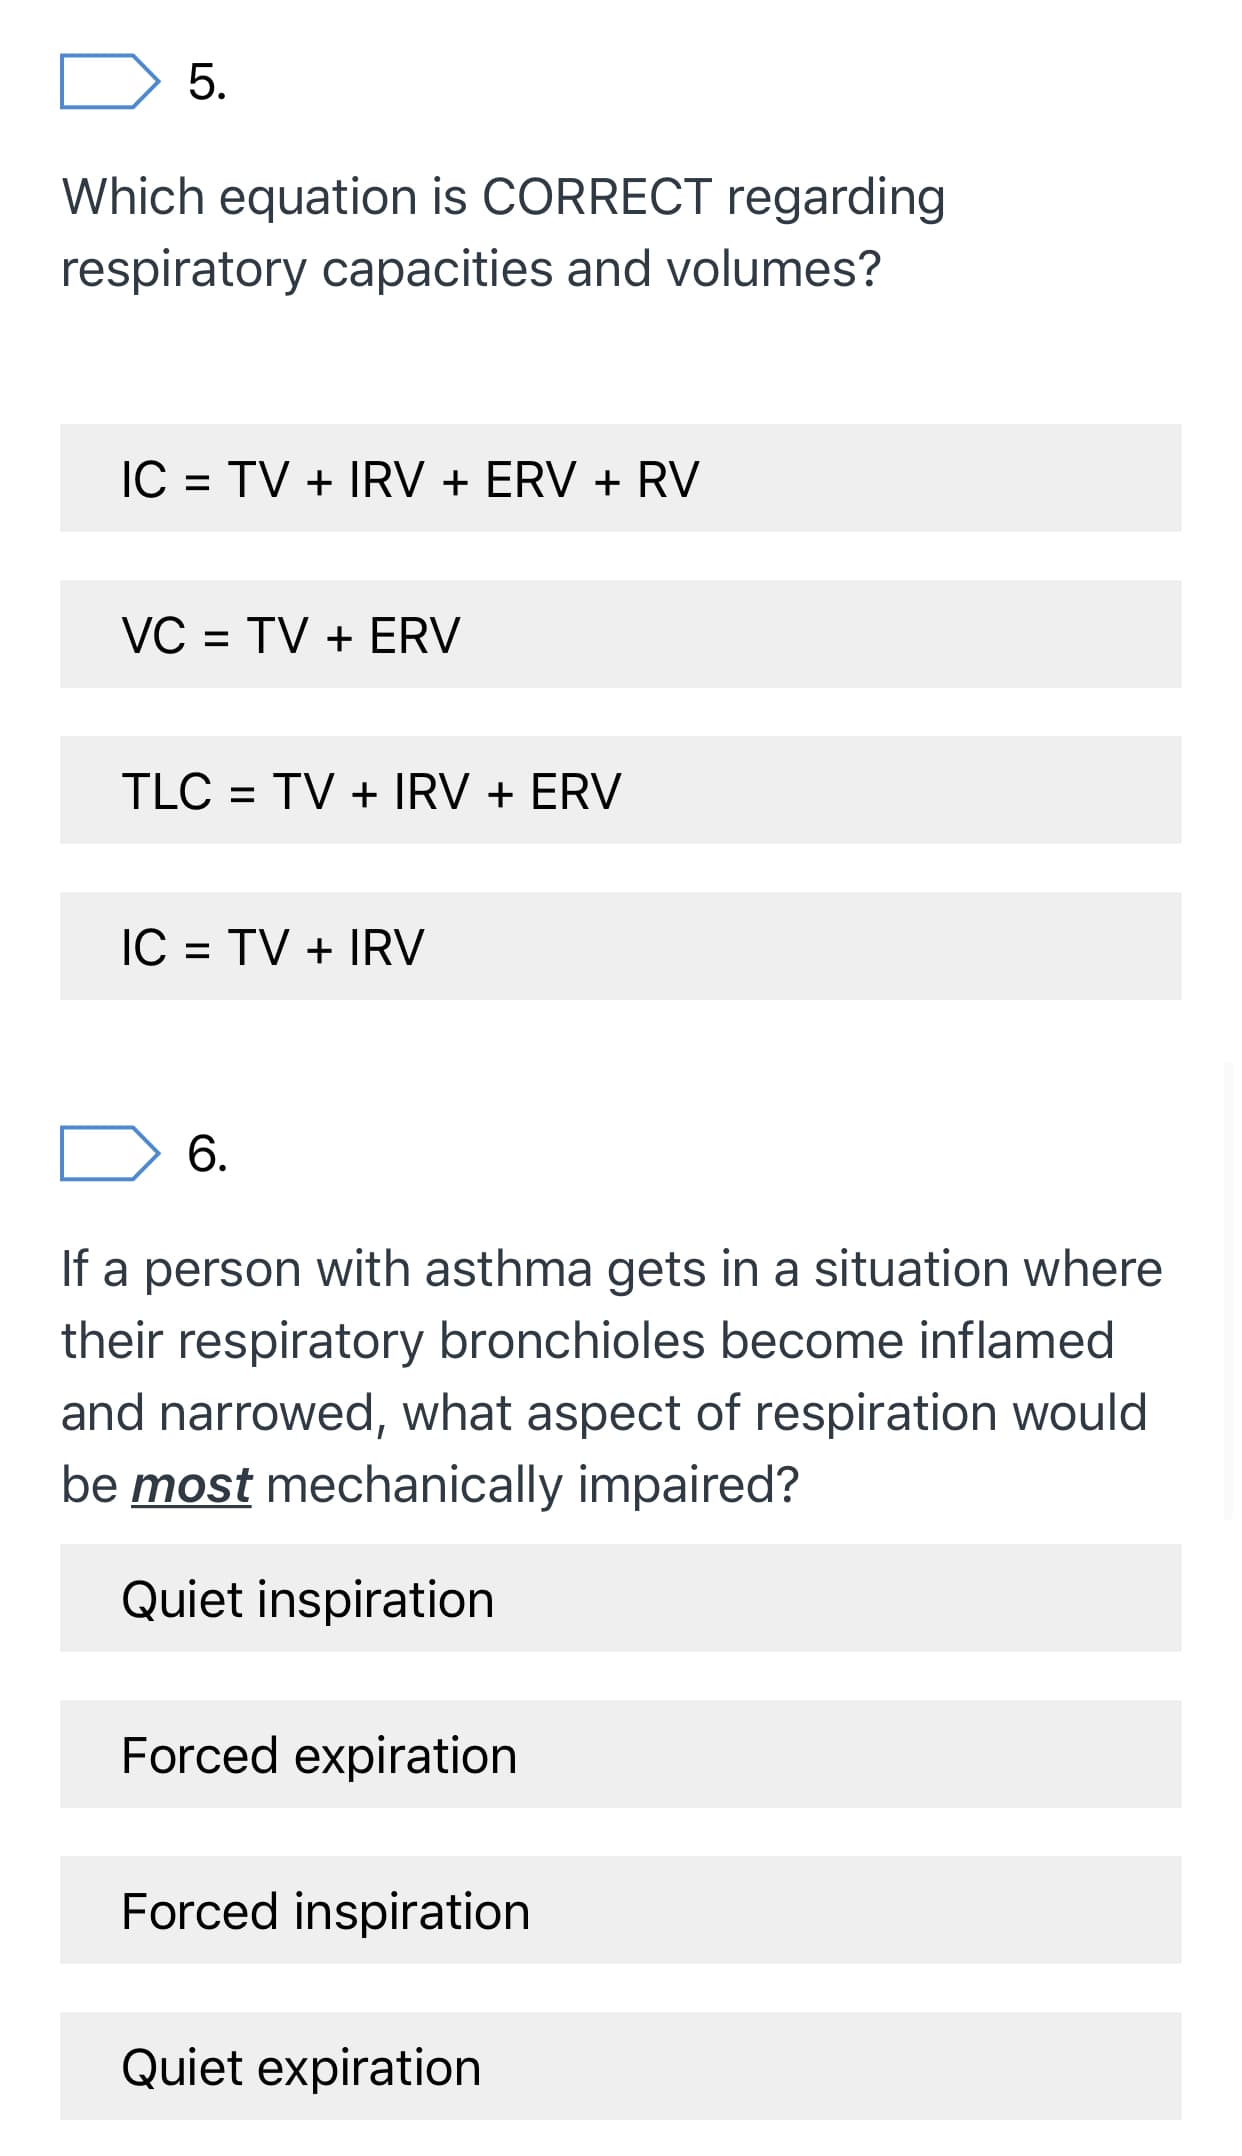 5.
Which equation is CORRECT regarding
respiratory capacities and volumes?
IC = TV + IRV + ERV + RV
VC = TV + ERV
%D
TLC = TV + IRV + ERV
IC = TV + IRV
6.
If a person with asthma gets in a situation where
their respiratory bronchioles become inflamed
and narrowed, what aspect of respiration would
be most mechanically impaired?
Quiet inspiration
Forced expiration
Forced inspiration
Quiet expiration
